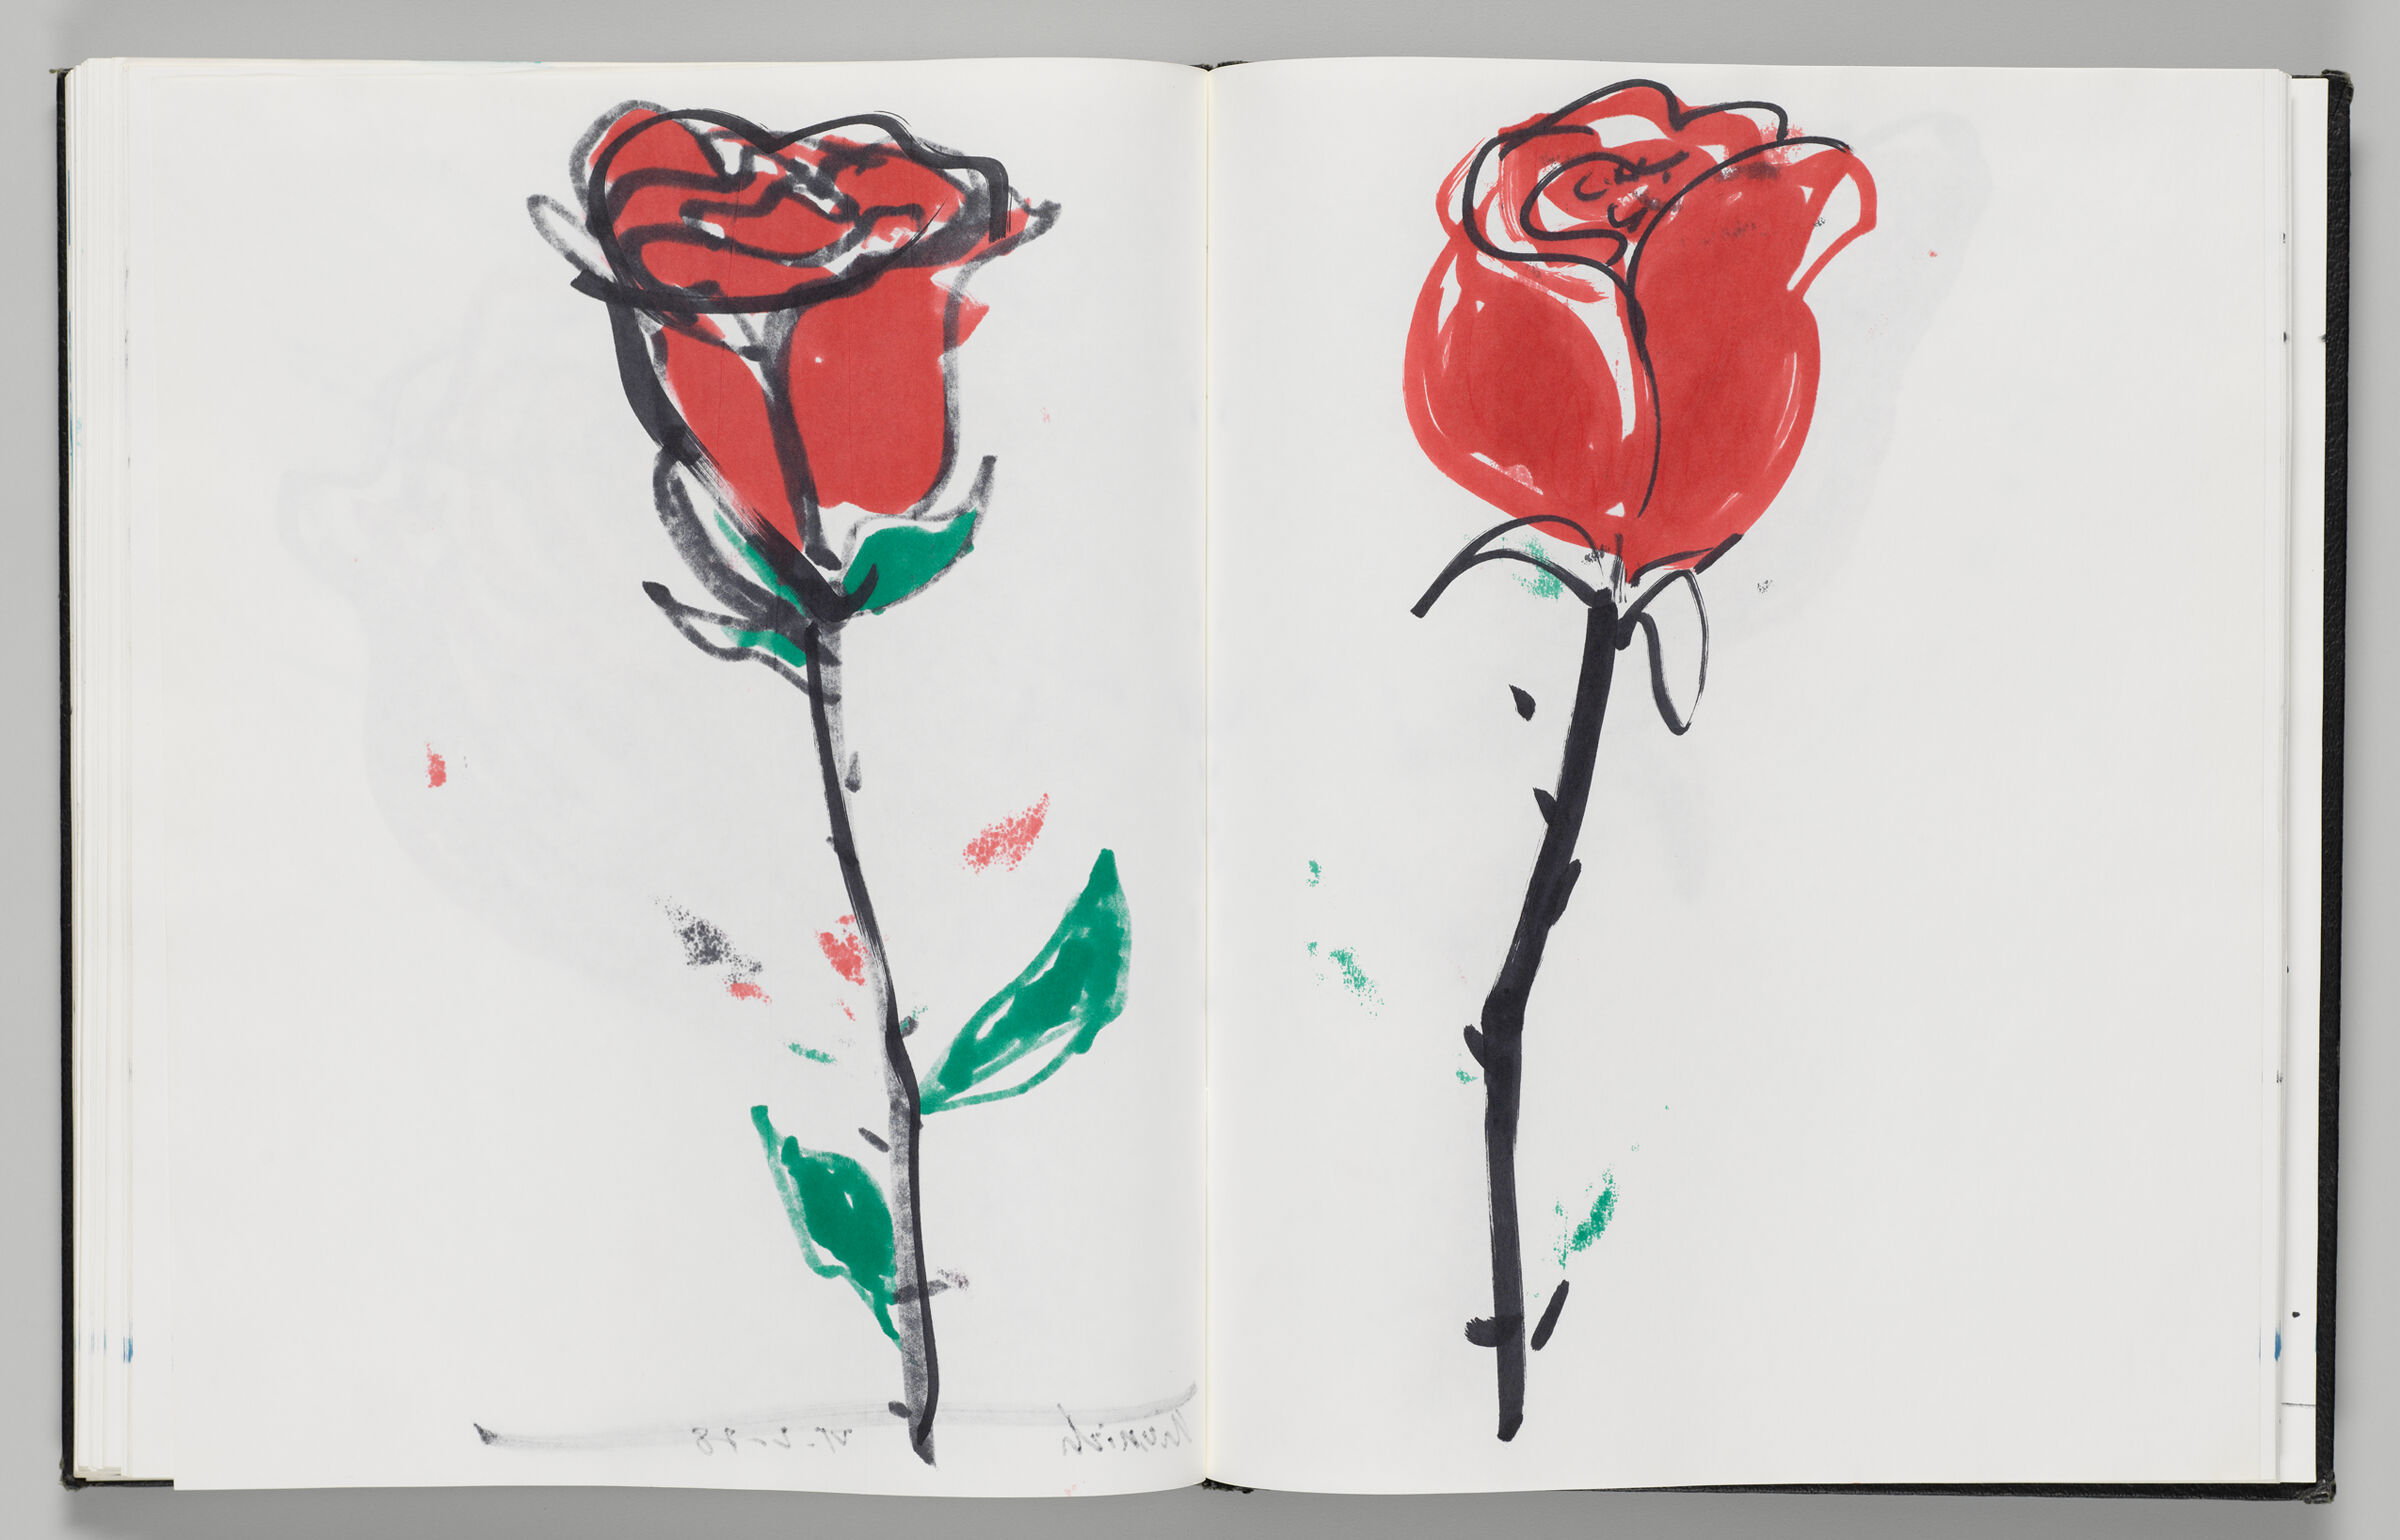 Untitled (Bleed-Through Of Previous Page, Left Page); Untitled (Red Rose, Right Page)